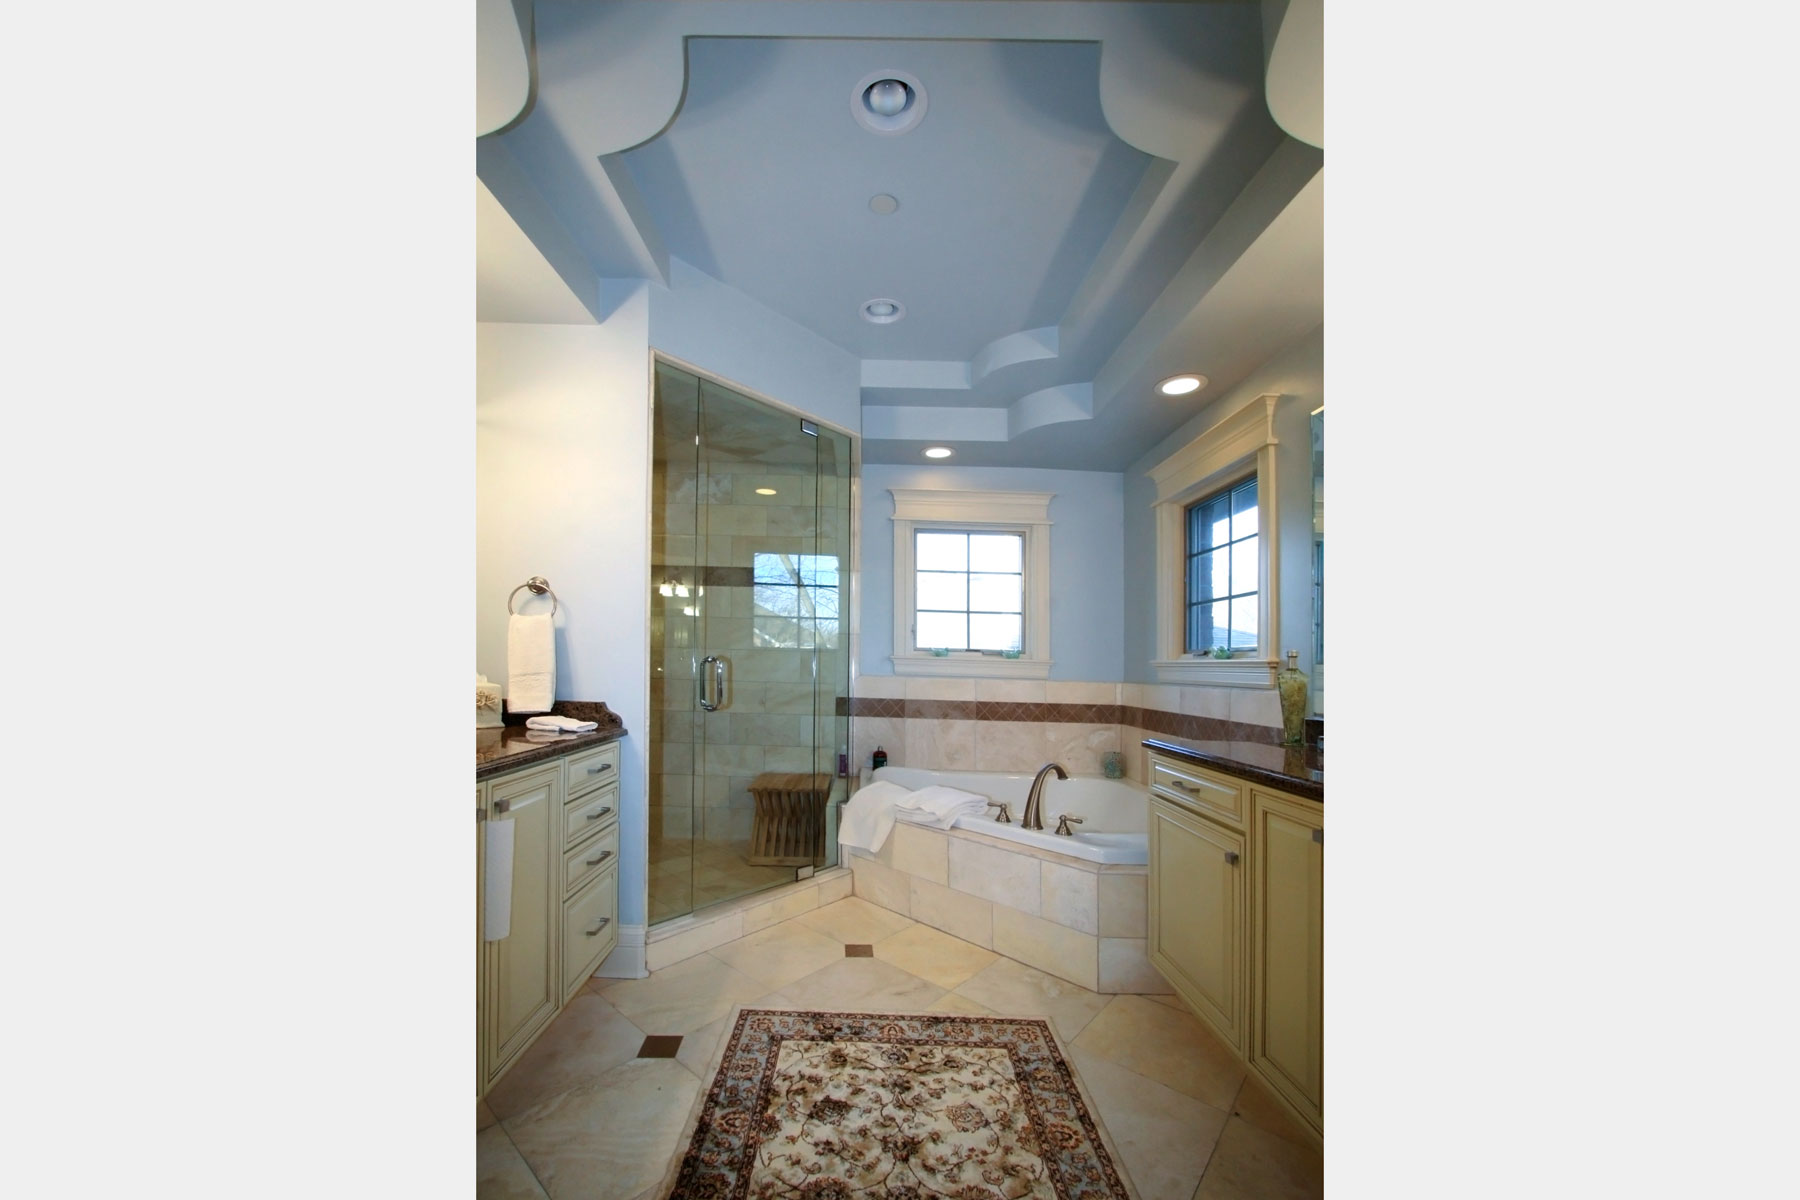 Master Bathroom - 6933 N. Keating Ave., Lincolnwood, IL Custom Home. America's Custom Home Builders: New Construction, Remodeling, Restoration Services. Residential and Commercial.